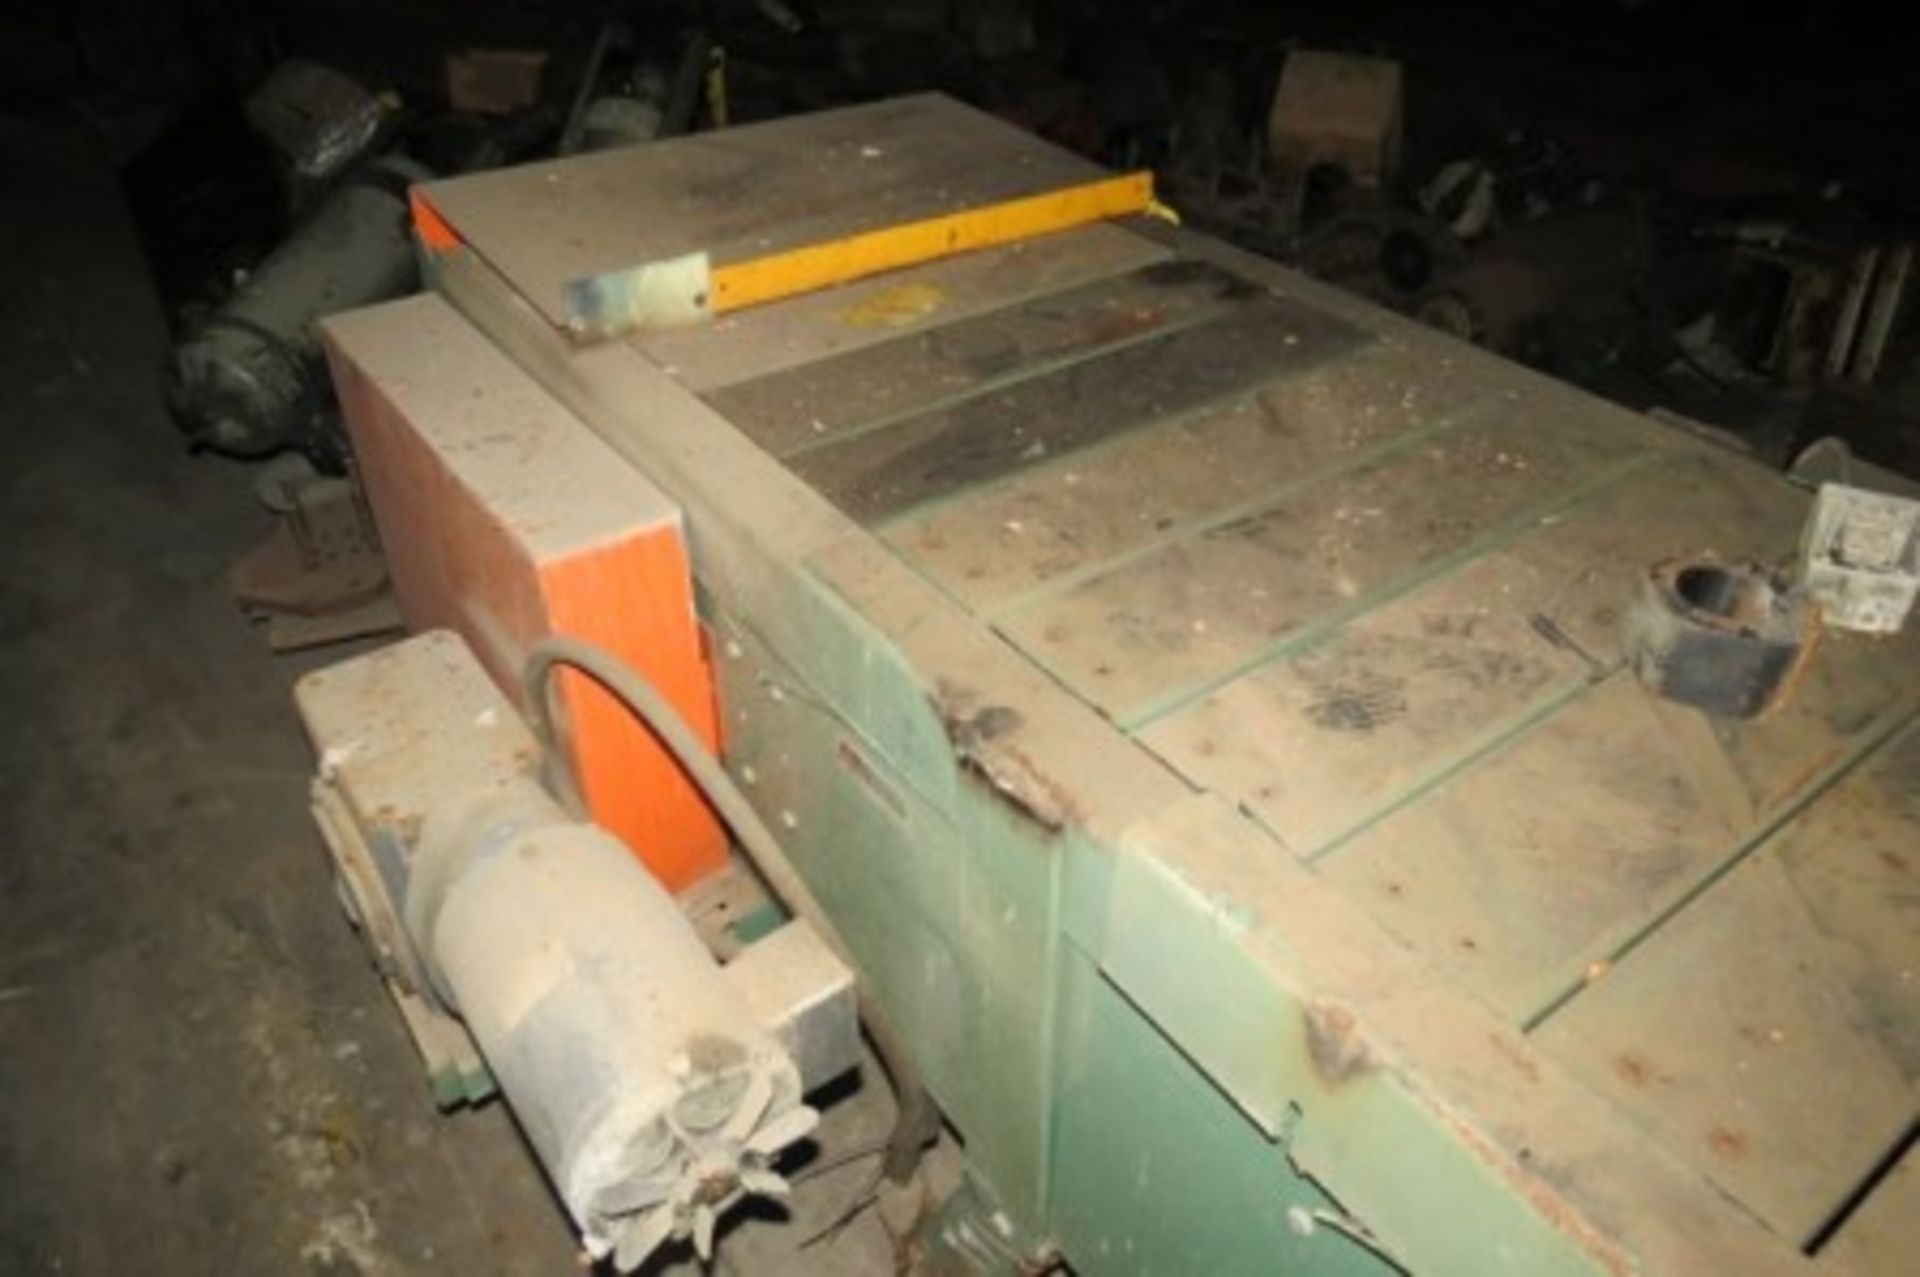 Electric motor 50 hp. Spare parts for die casting machines. Belt conveyor - Image 19 of 19